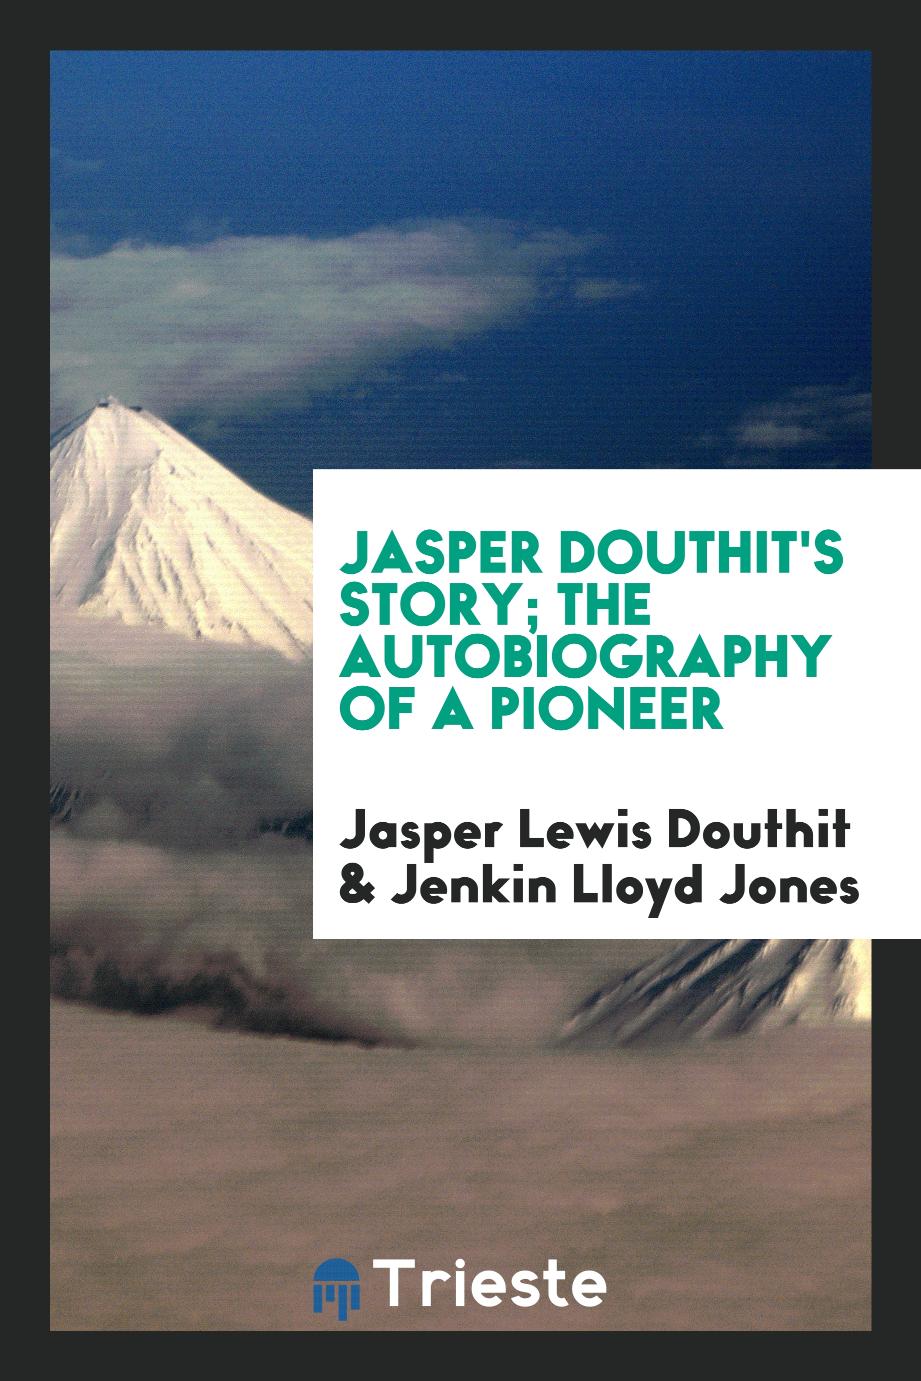 Jasper Douthit's story; the autobiography of a pioneer